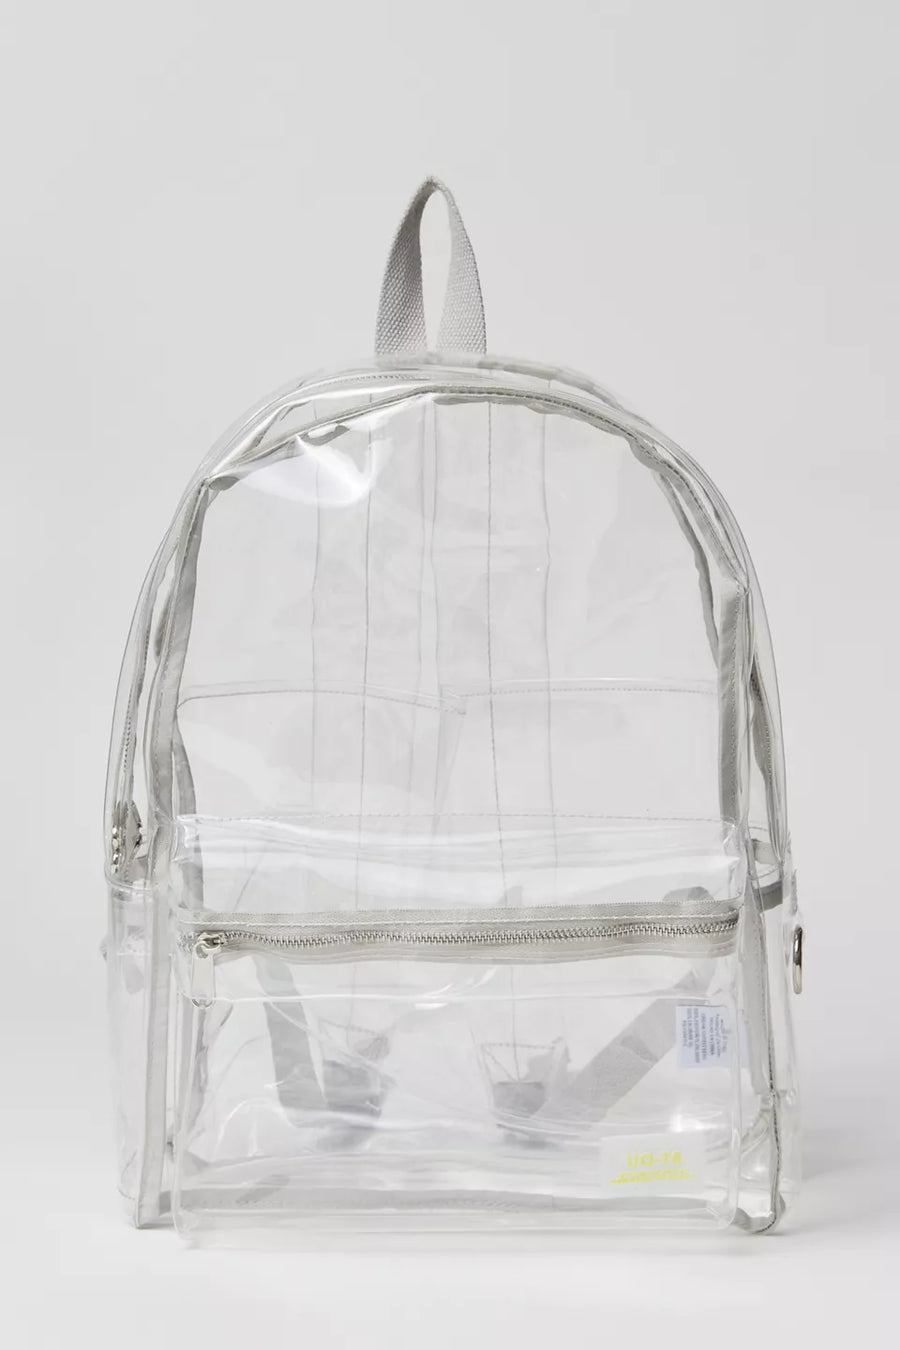 Exclusive Clear backpack in a classic Zip-Top Silhouette With Pocket